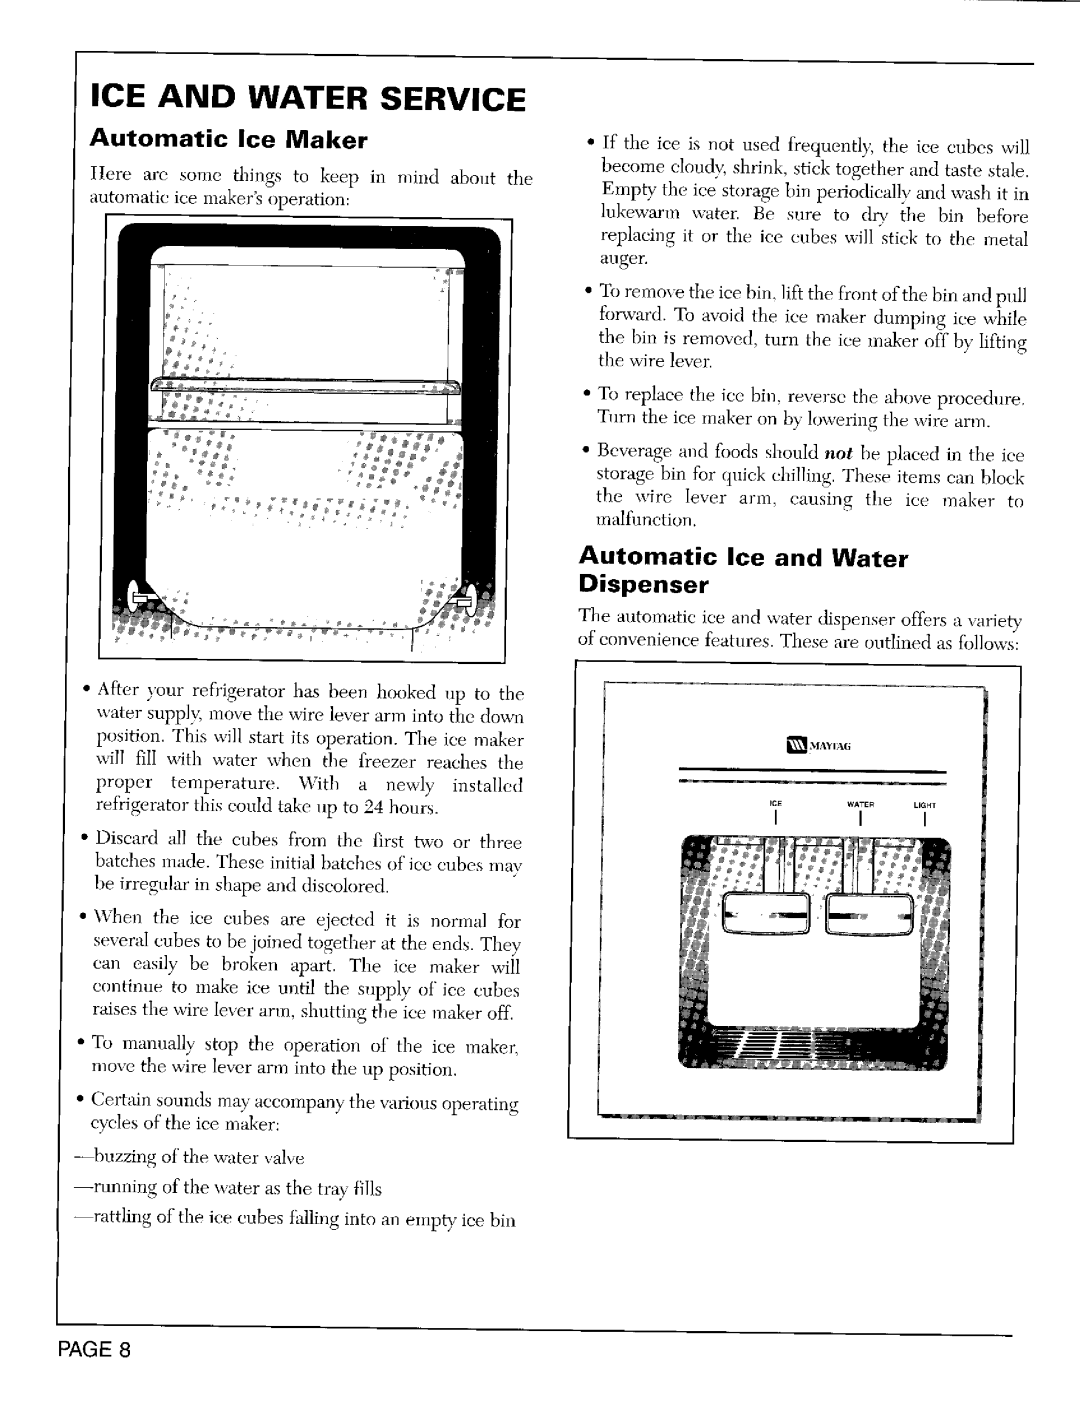 Maytag RST2400, RST2200 warranty Ice And Water Service, Automatic Ice Maker, Automatic Ice and Water Dispenser, PAGE8 